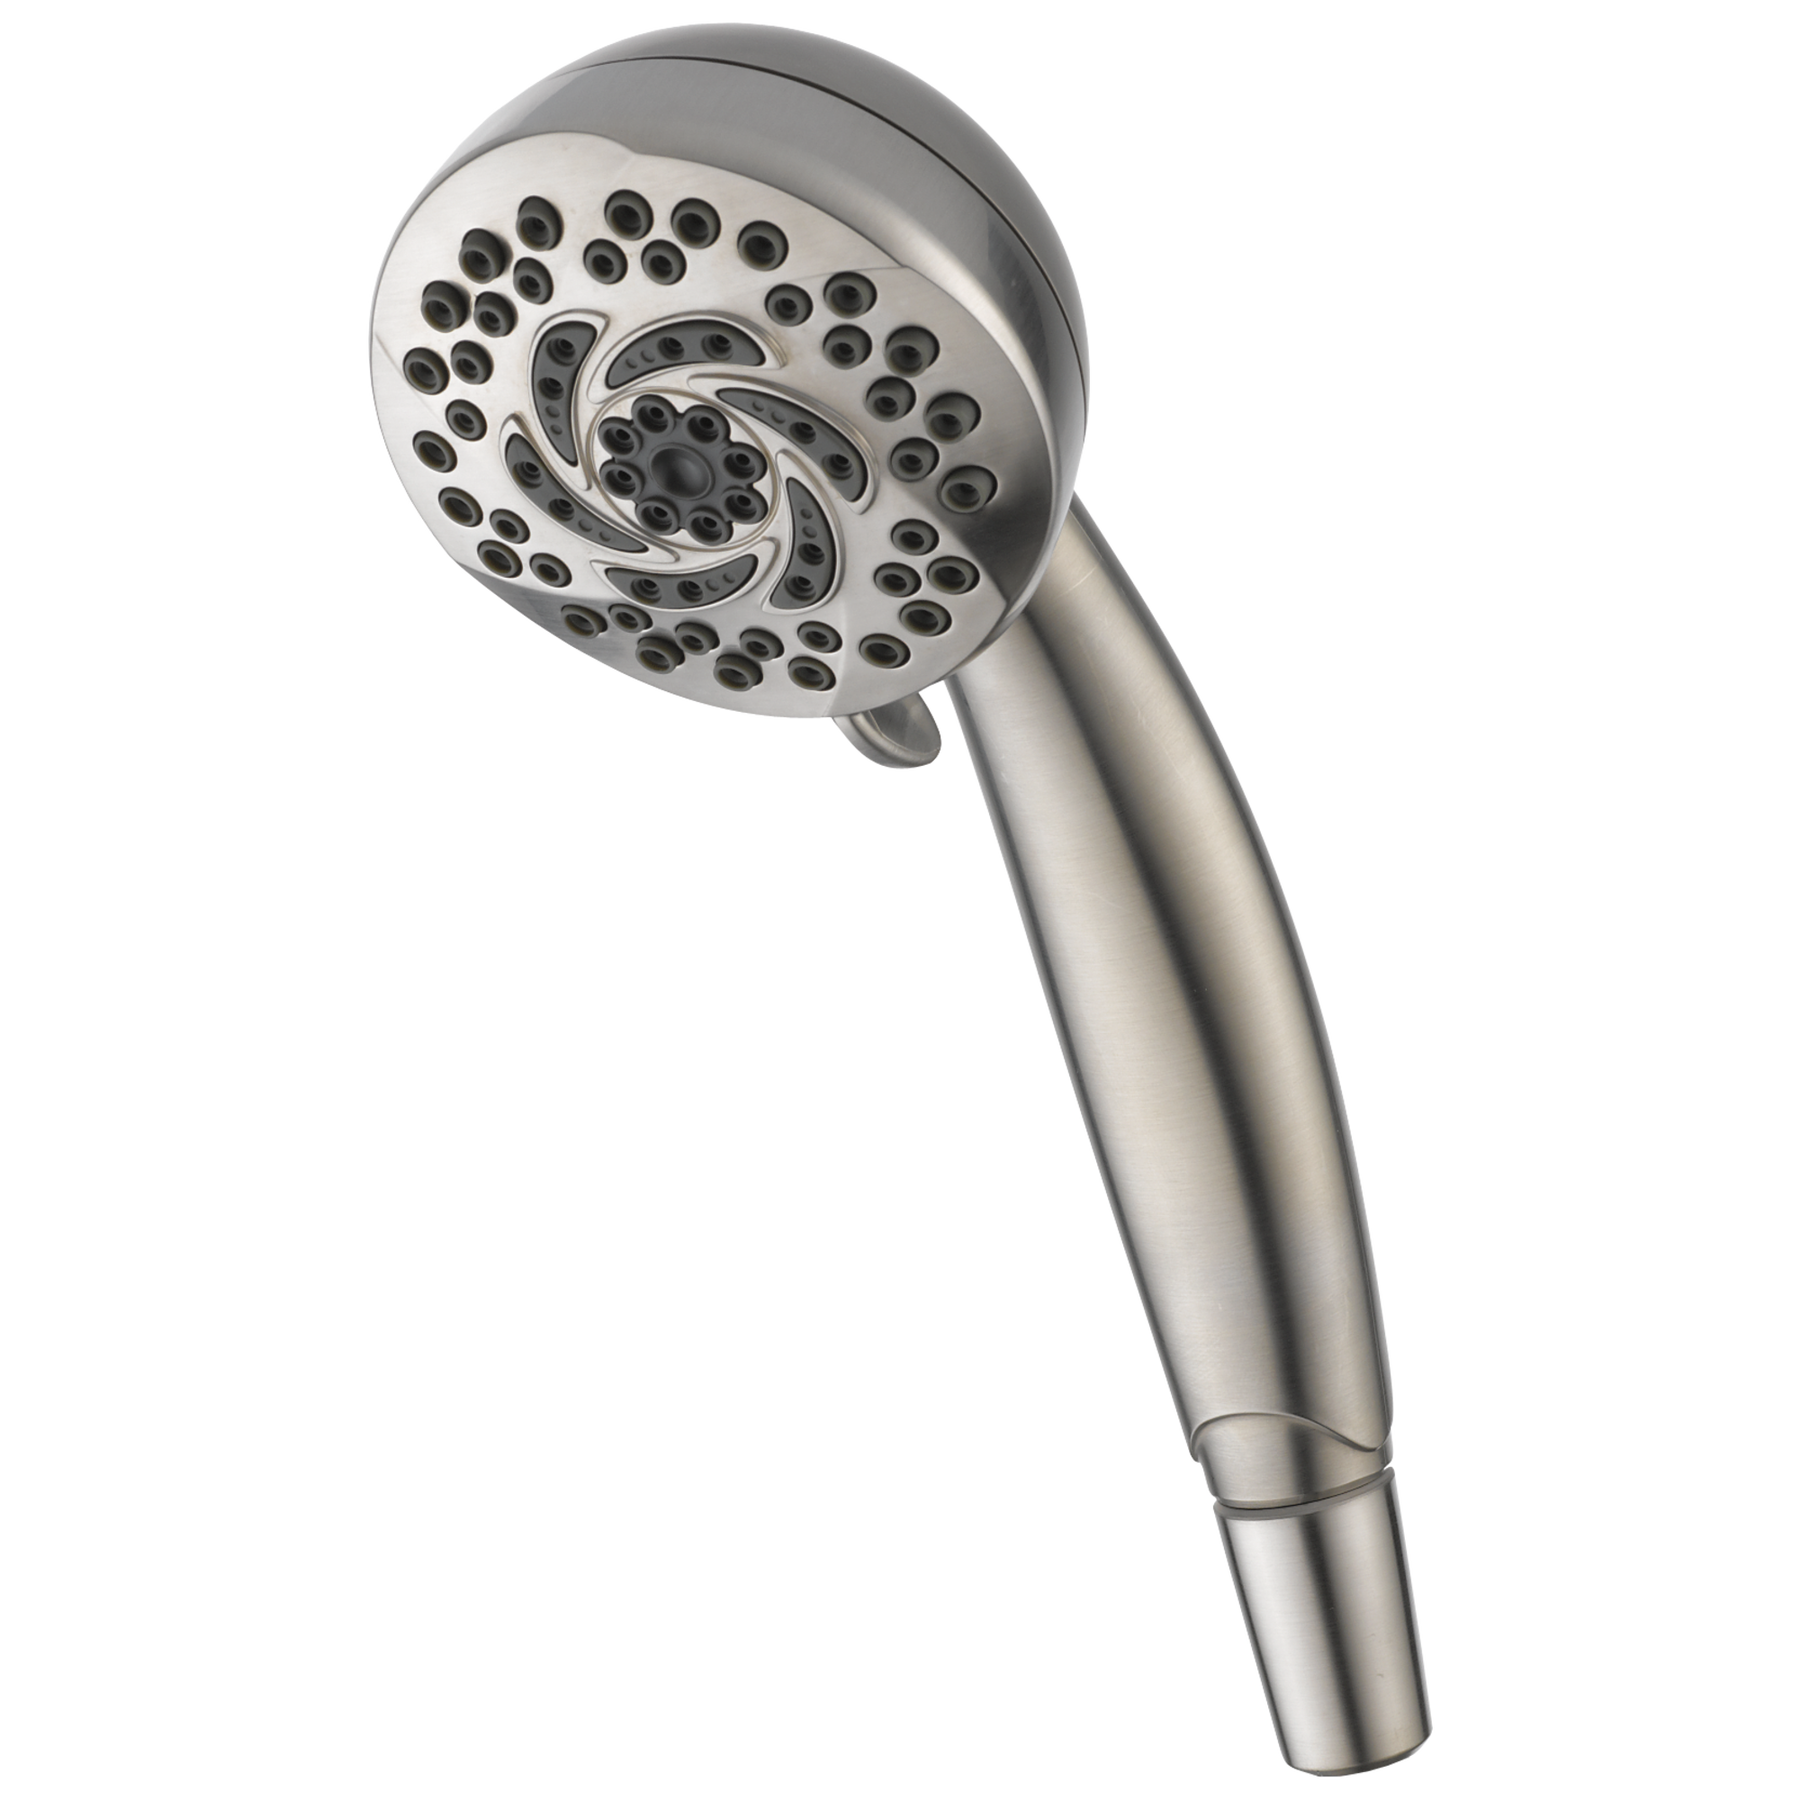 Premium 5-Setting Hand Shower in Stainless 59436-SS-PK | Delta Faucet